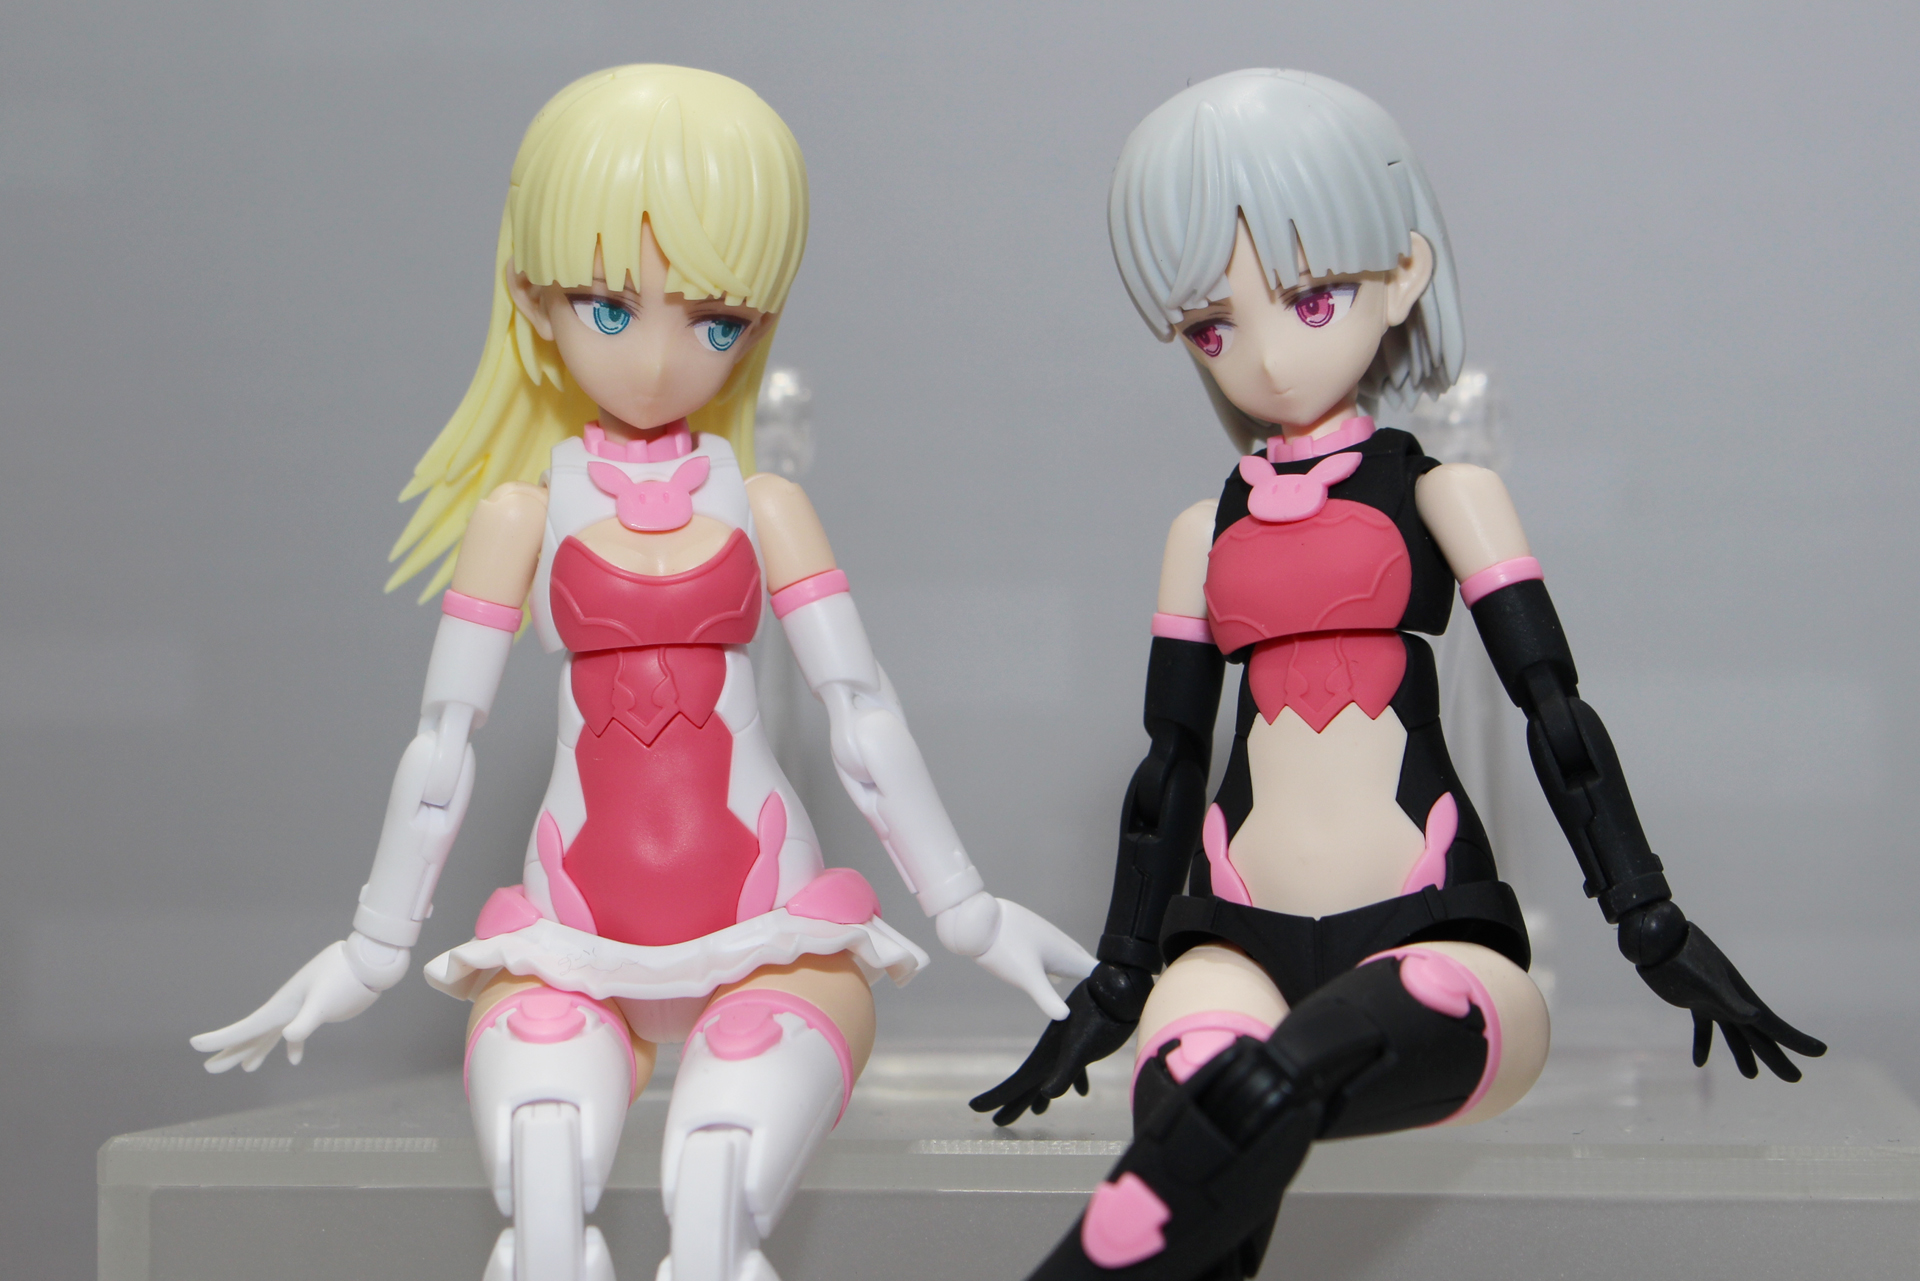 30MS リシェッタ本体キット＆アーム•レッグパーツ[カラーA]セット - blog.knak.jp